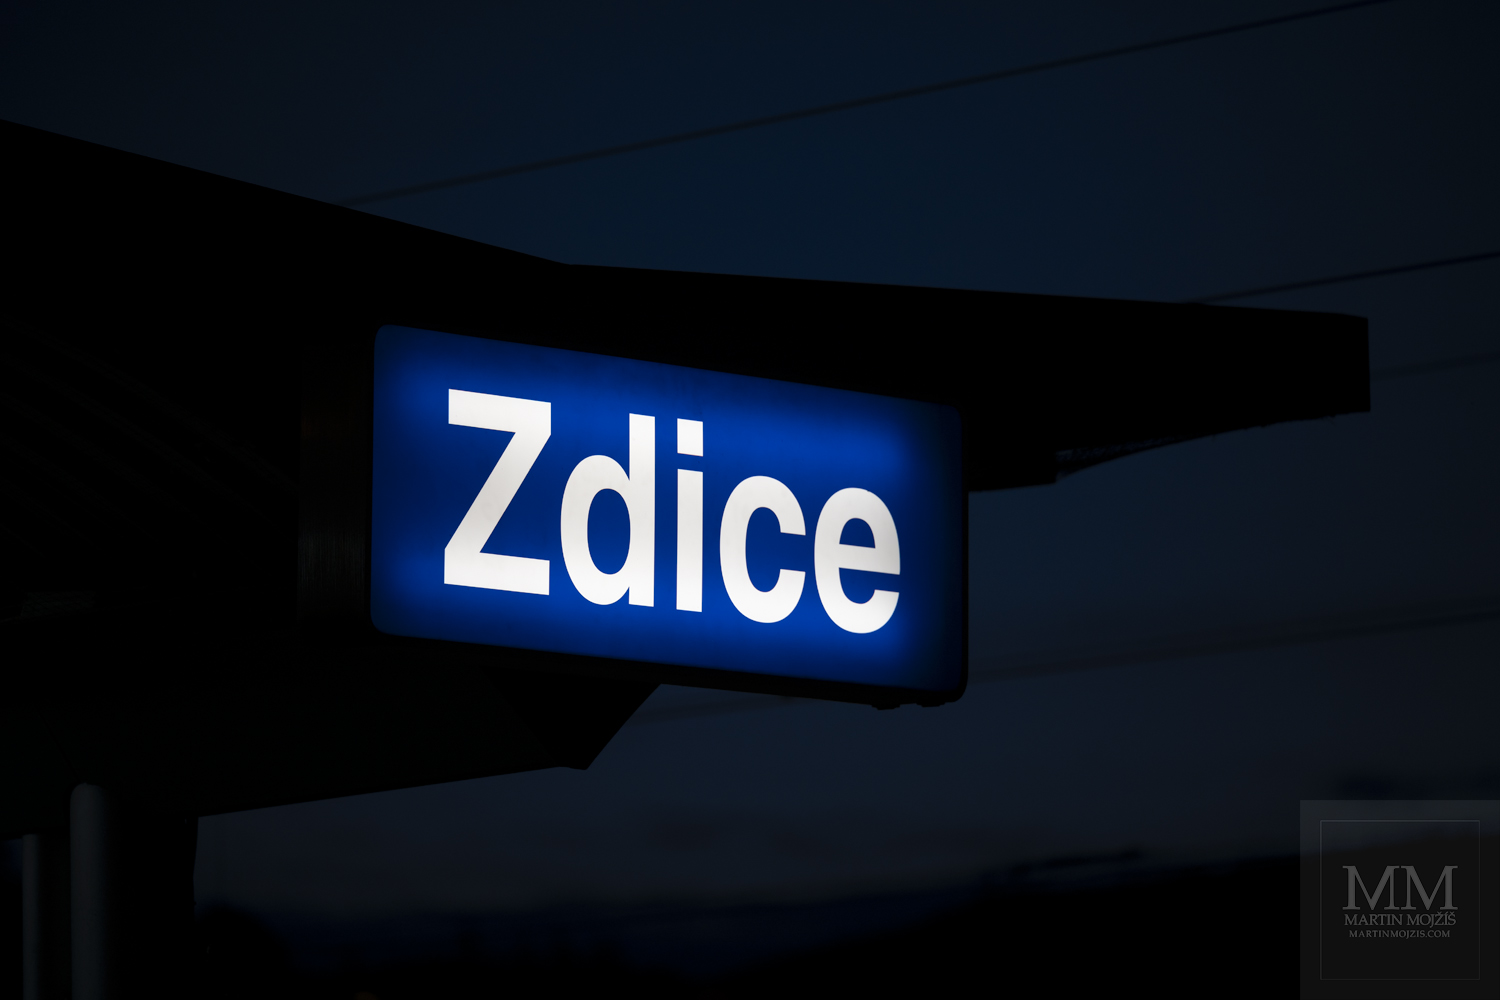 A illuminated name of the Zdice railway station at dusk. Fine art photograph EVENINGS IN ZDICE, photographed by Martin Mojzis.